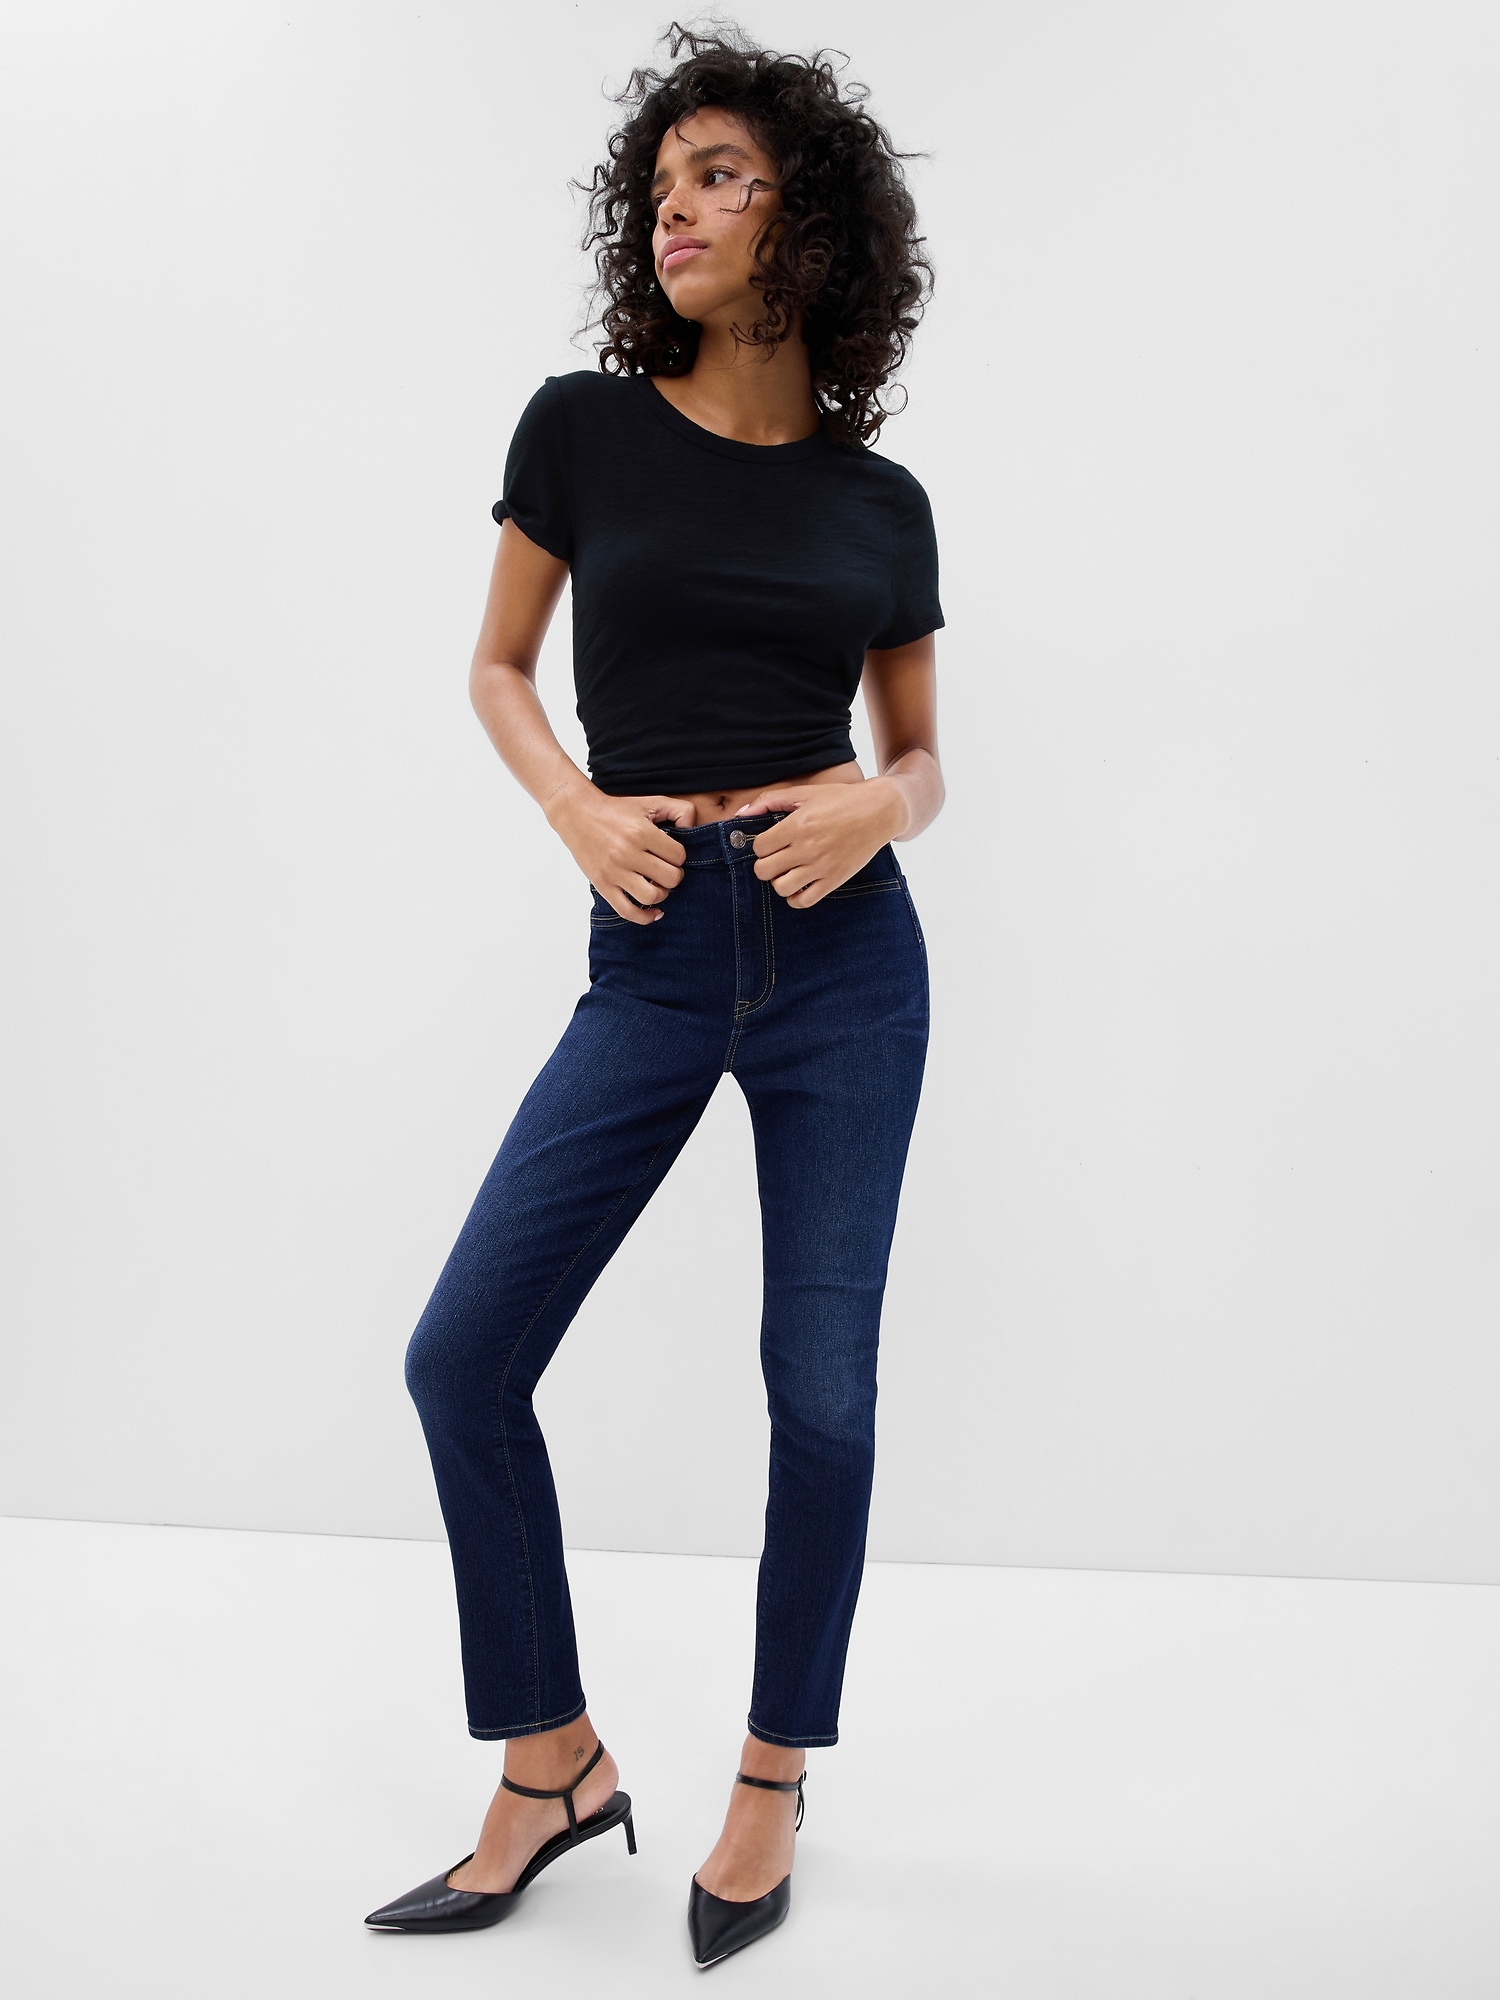 Buy Gap High Rise Universal Jegging from the Gap online shop